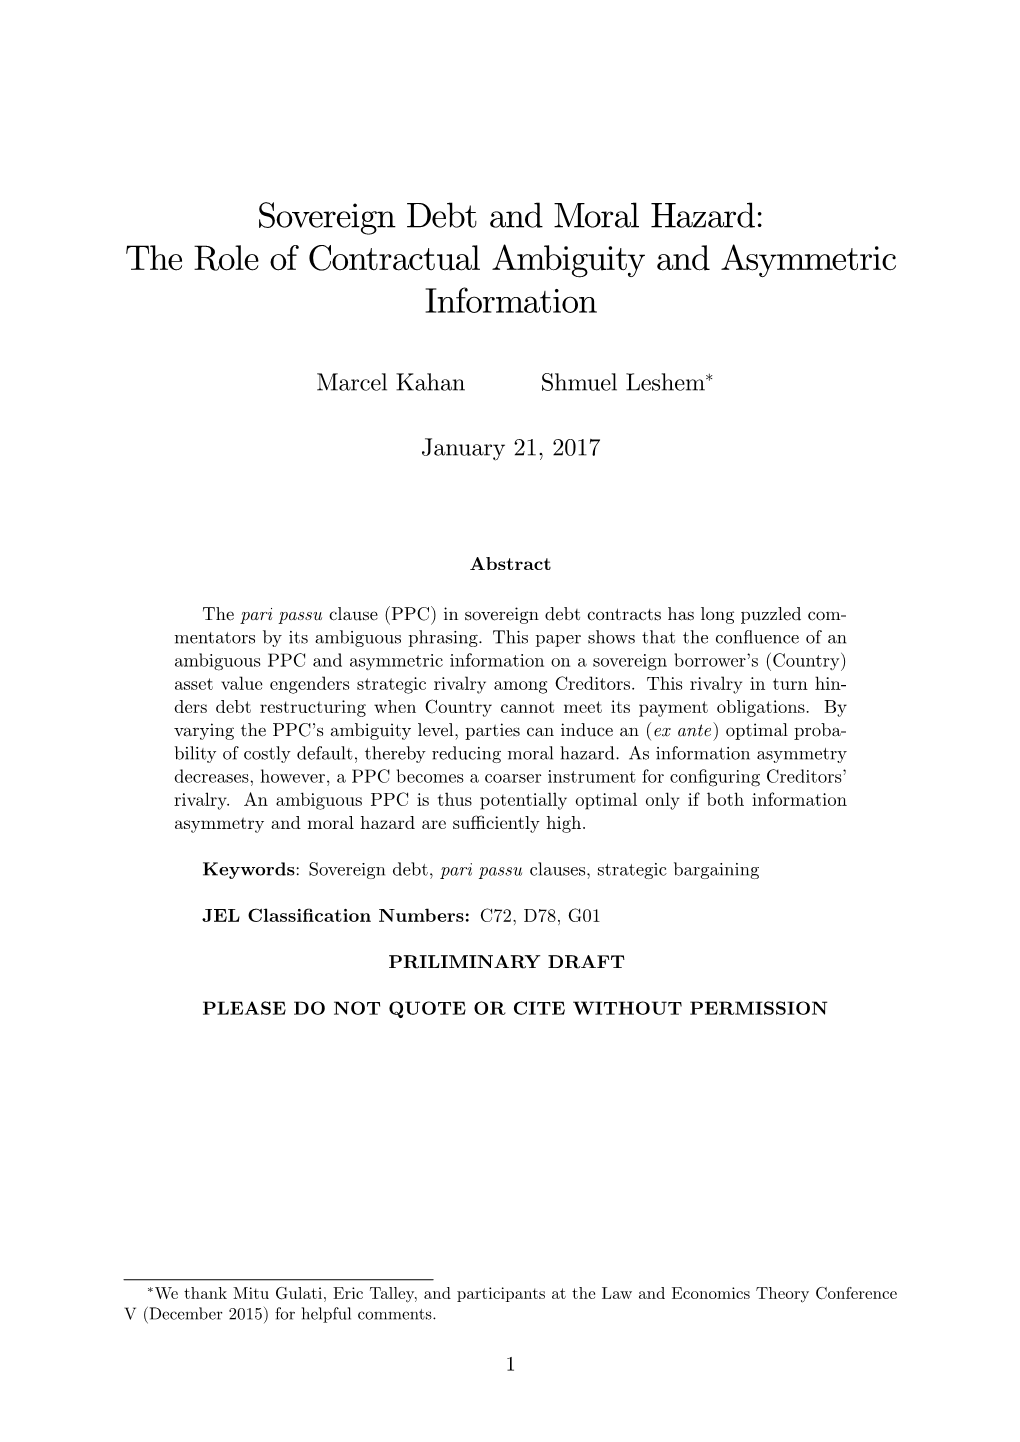 Sovereign Debt and Moral Hazard: the Role of Contractual Ambiguity and Asymmetric Information